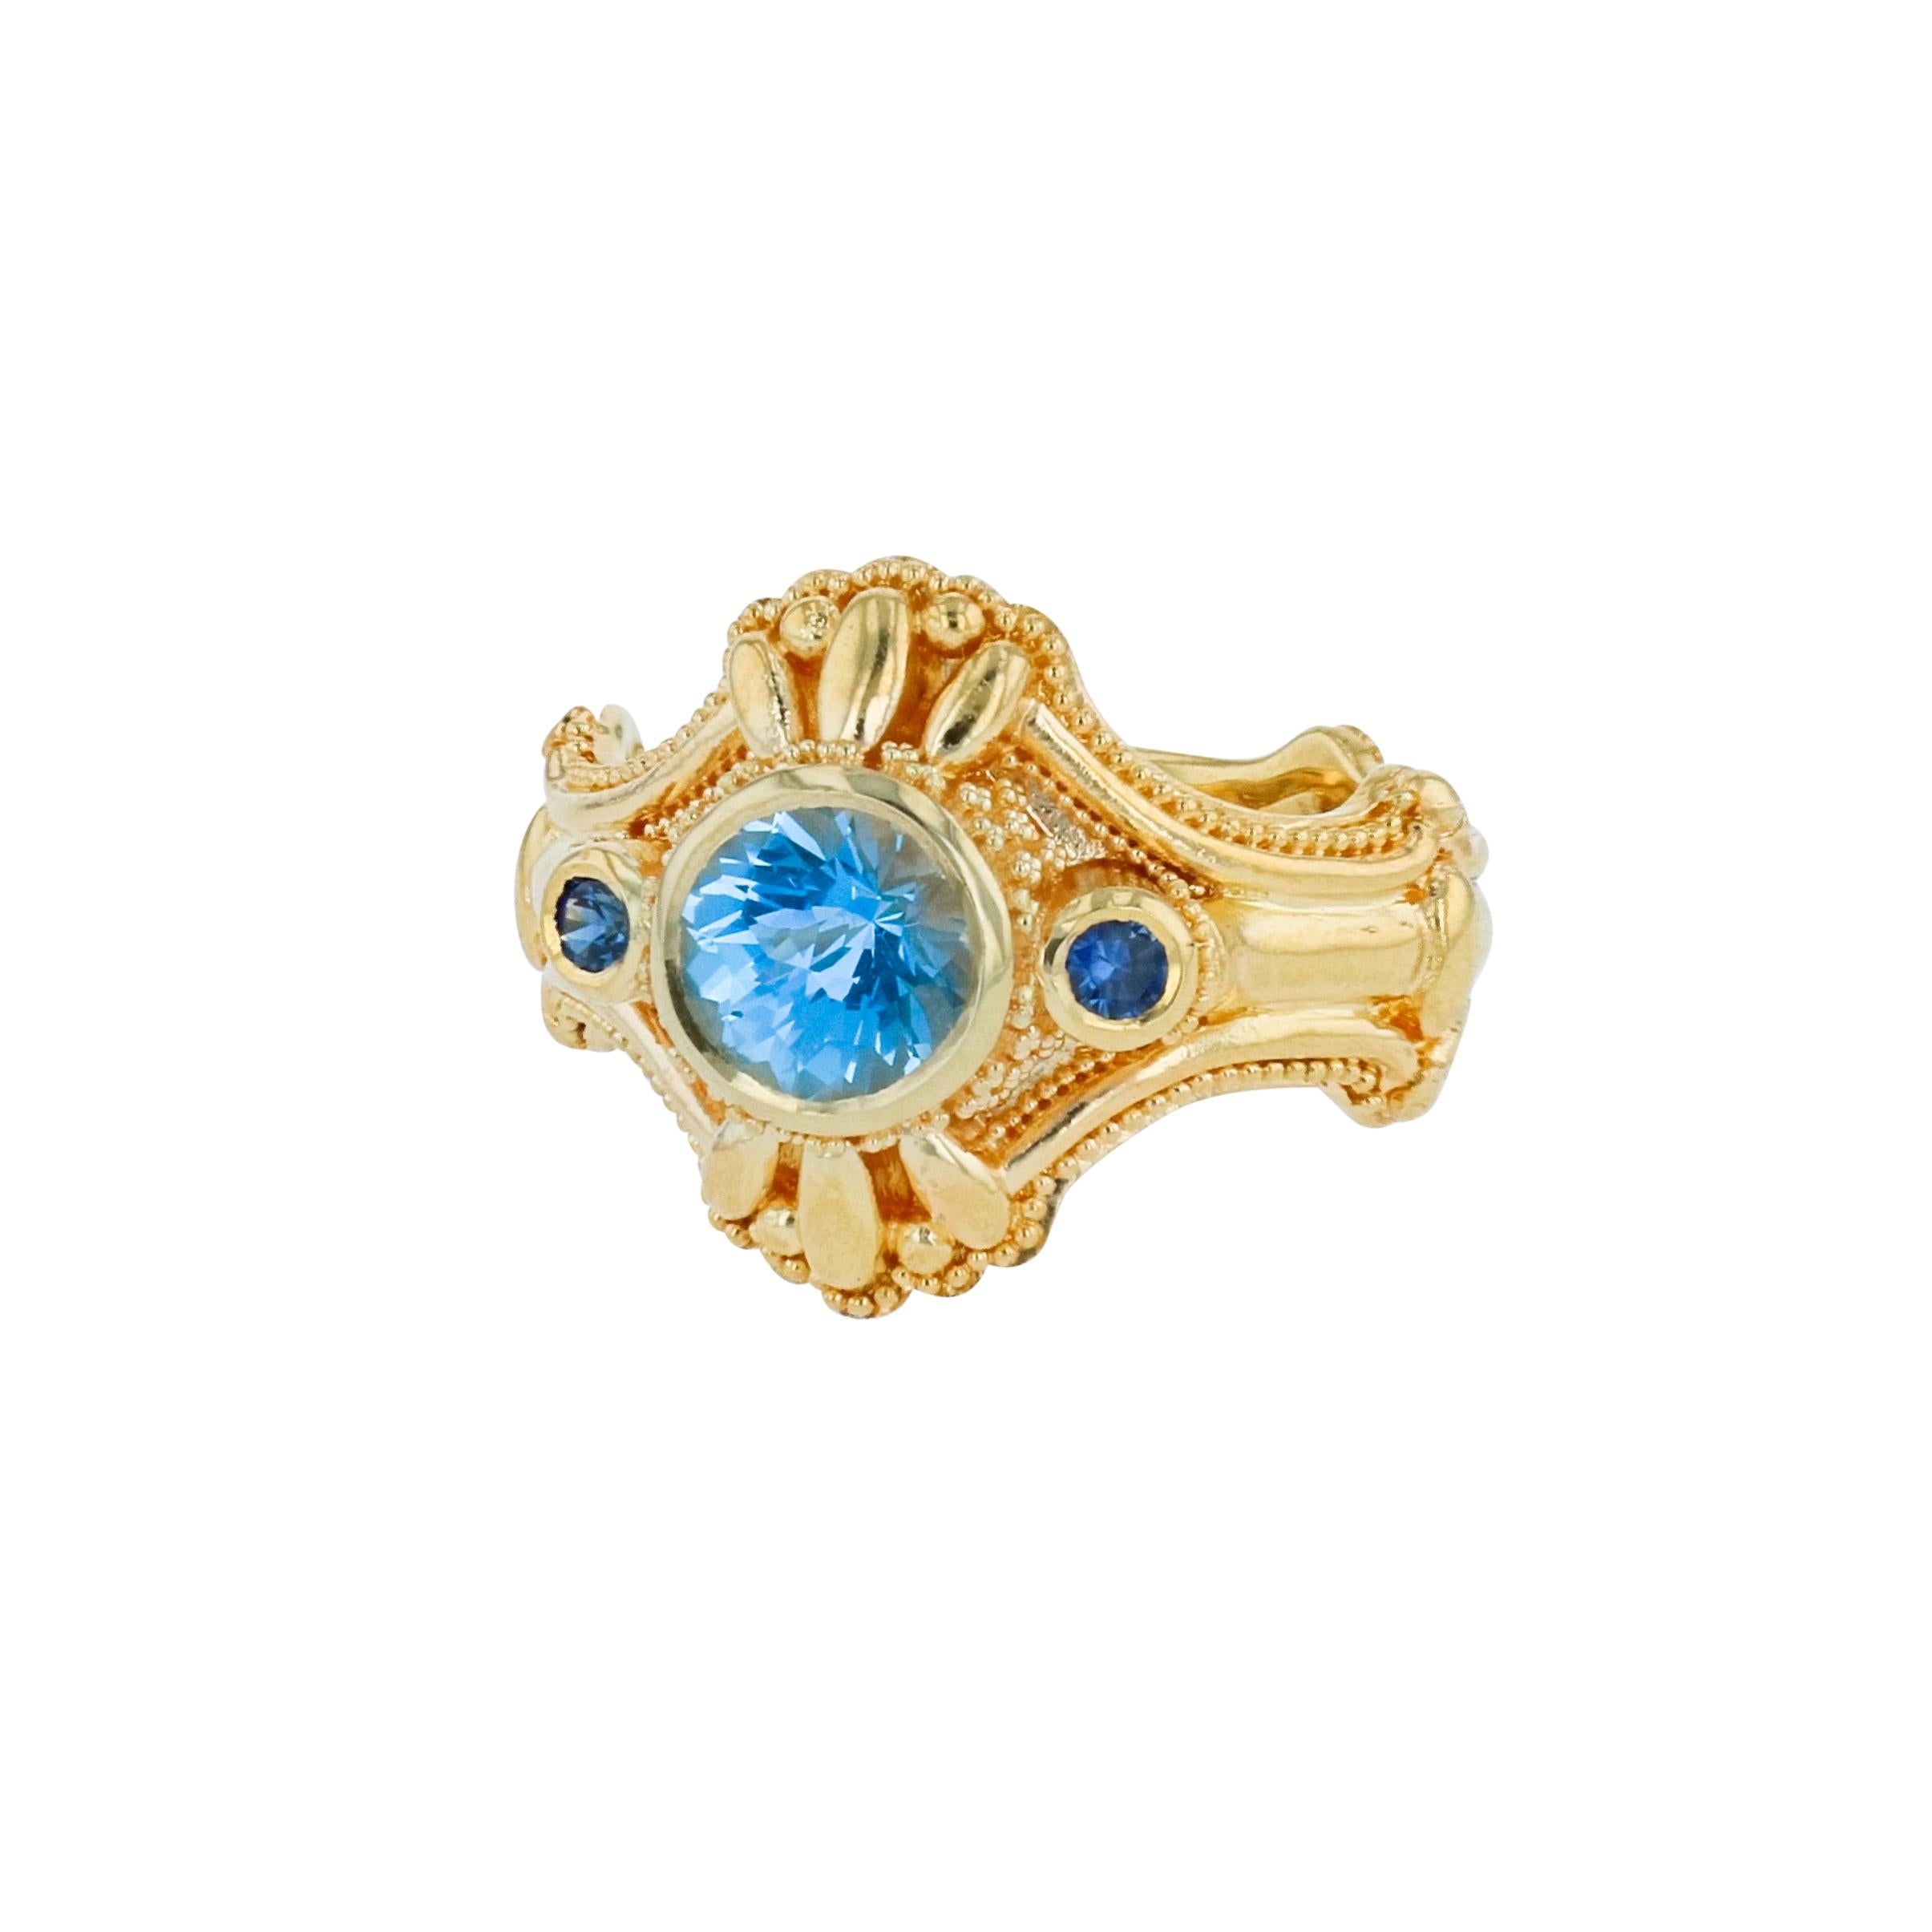 Kent Raible's Aquamarine and Blue Sapphire Three-Stone Ring has all the unique and wonderful Raible trademarks... Beautiful intricate detailing, all accented with fine granulation! 

Size 6.4
This ring is sizable

Unlike much “designer” jewelry made